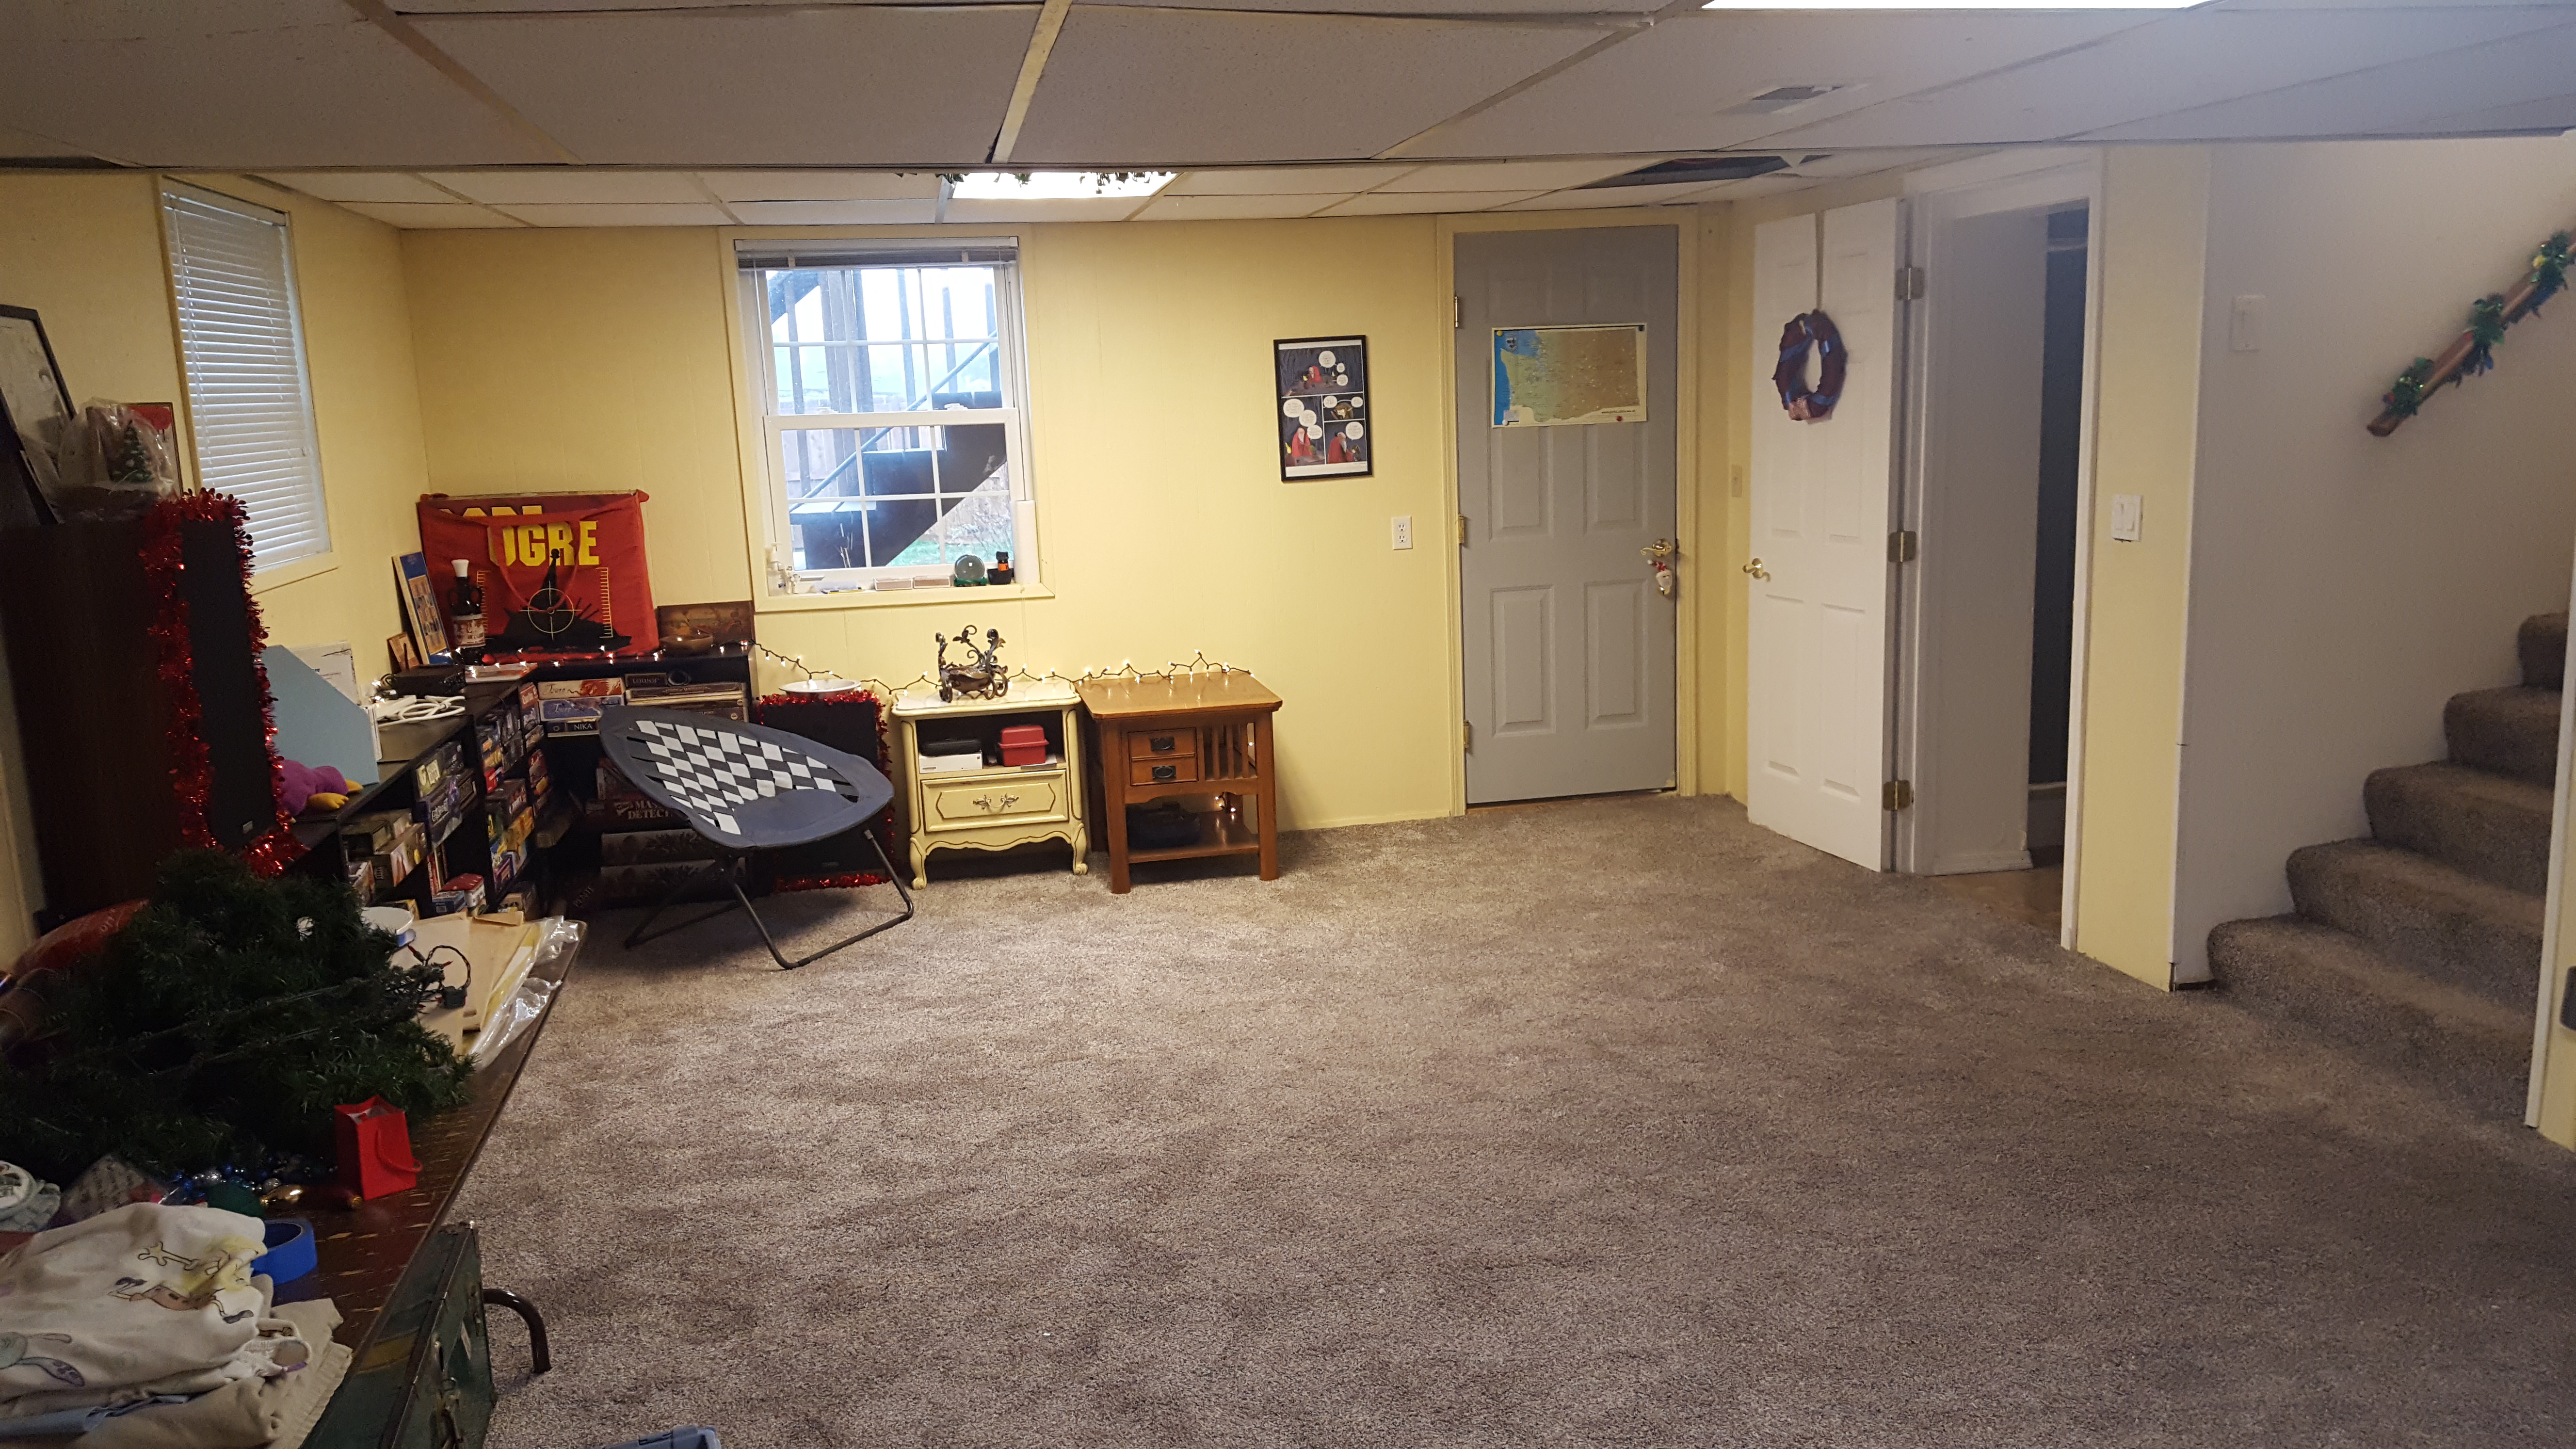 The basement in 2021. It's clean and carpeted and not really decorated very much beyond some garland and a wreath.